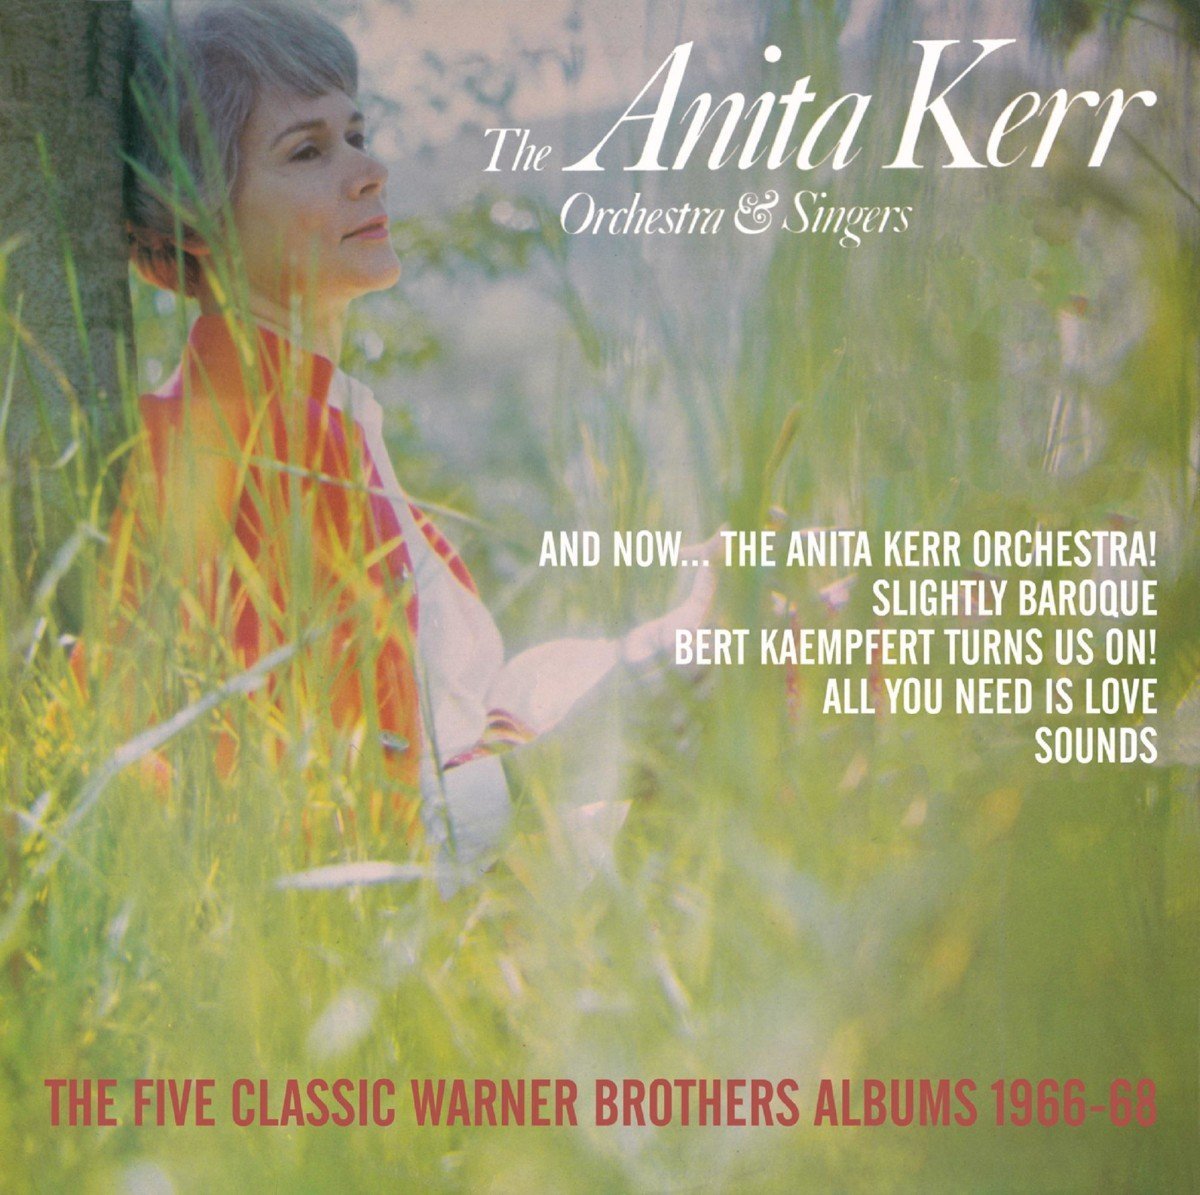 ANITA KERR ORCHESTRA / アニタ・カー・オーケストラ / THE FIVE CLASSIC WARNER BROTHERS ALBUMS 1966-68 (5CD BOX)